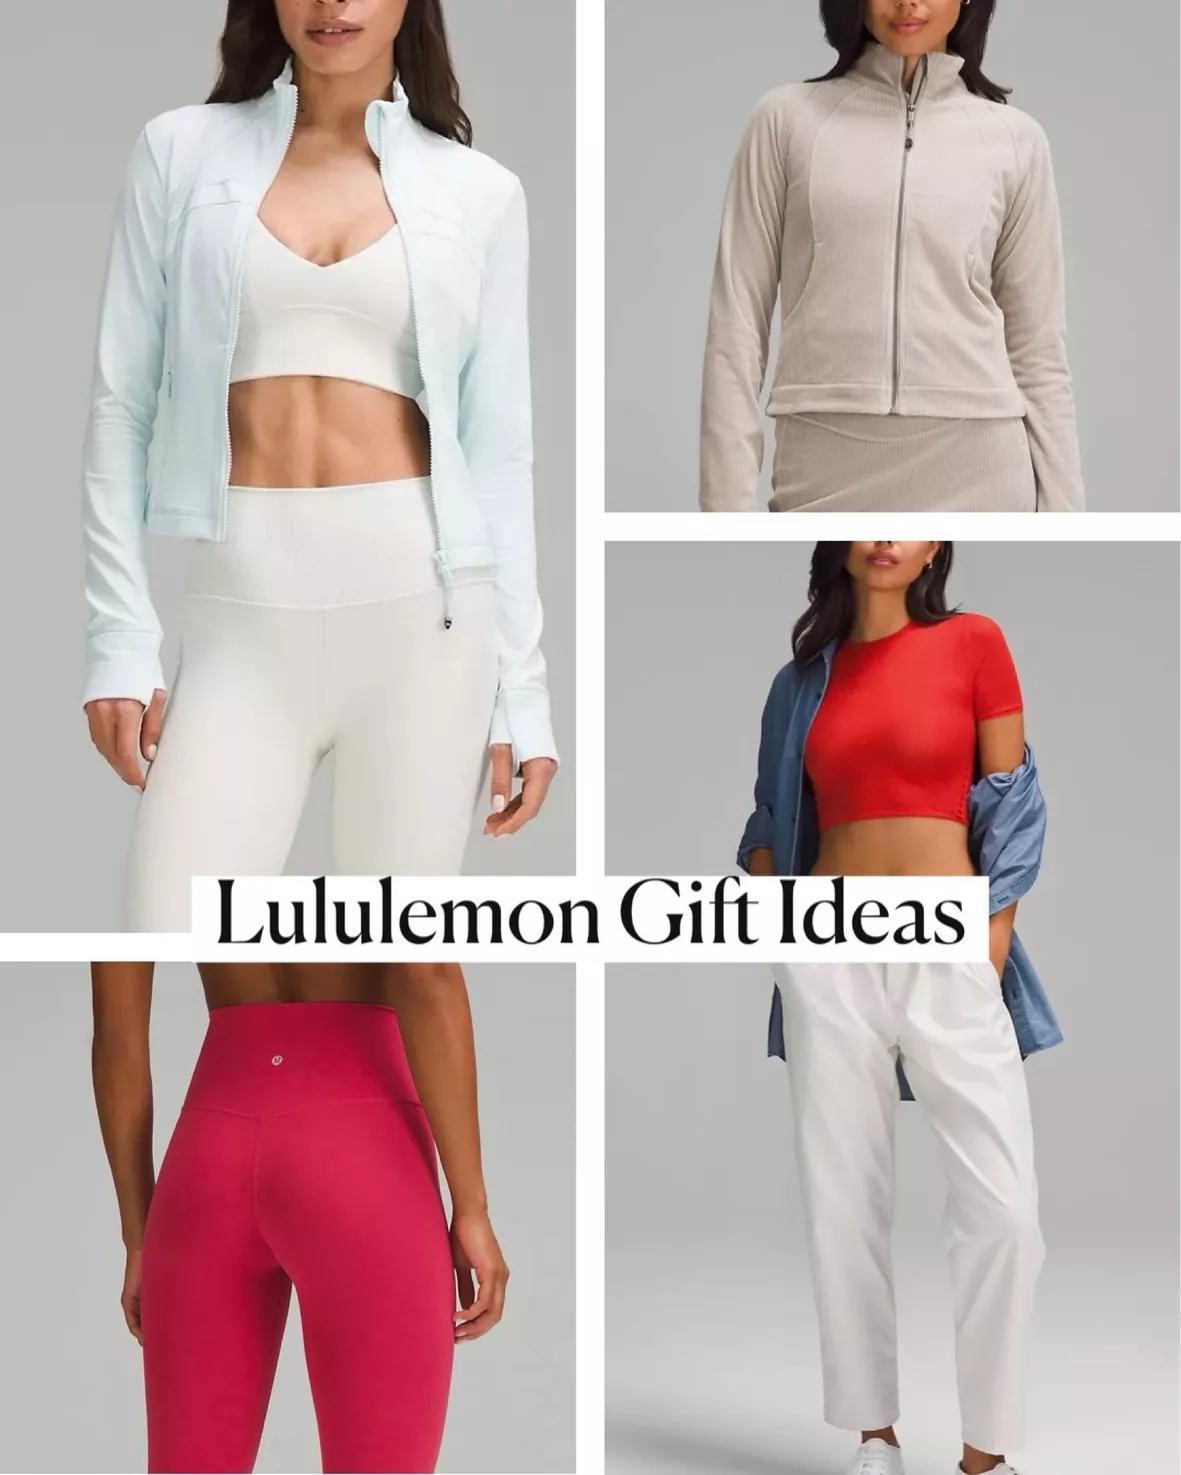 Align Chambray (2) and Flow y bra (4) : r/lululemon